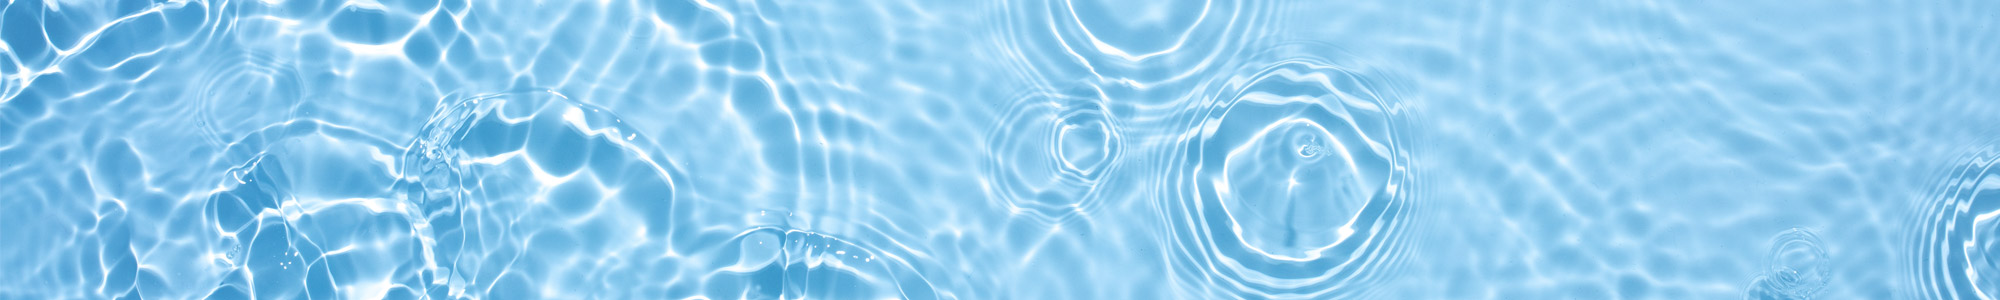 water with droplet circles spreading across the surface